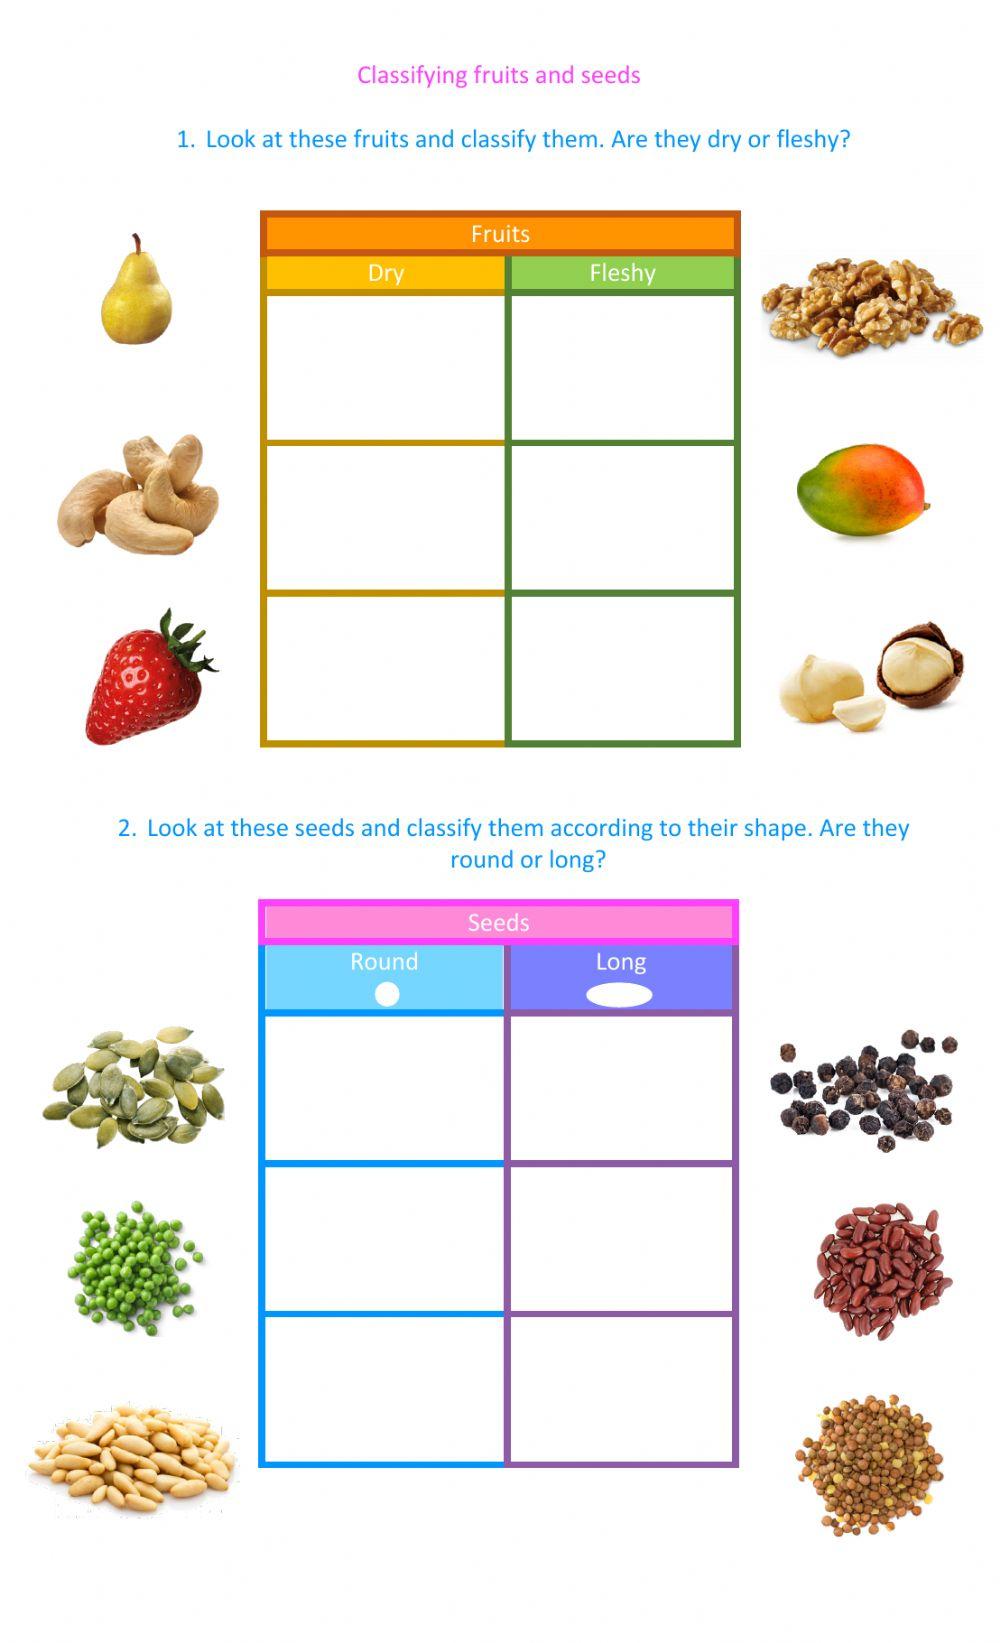 Classifying fruits and seeds